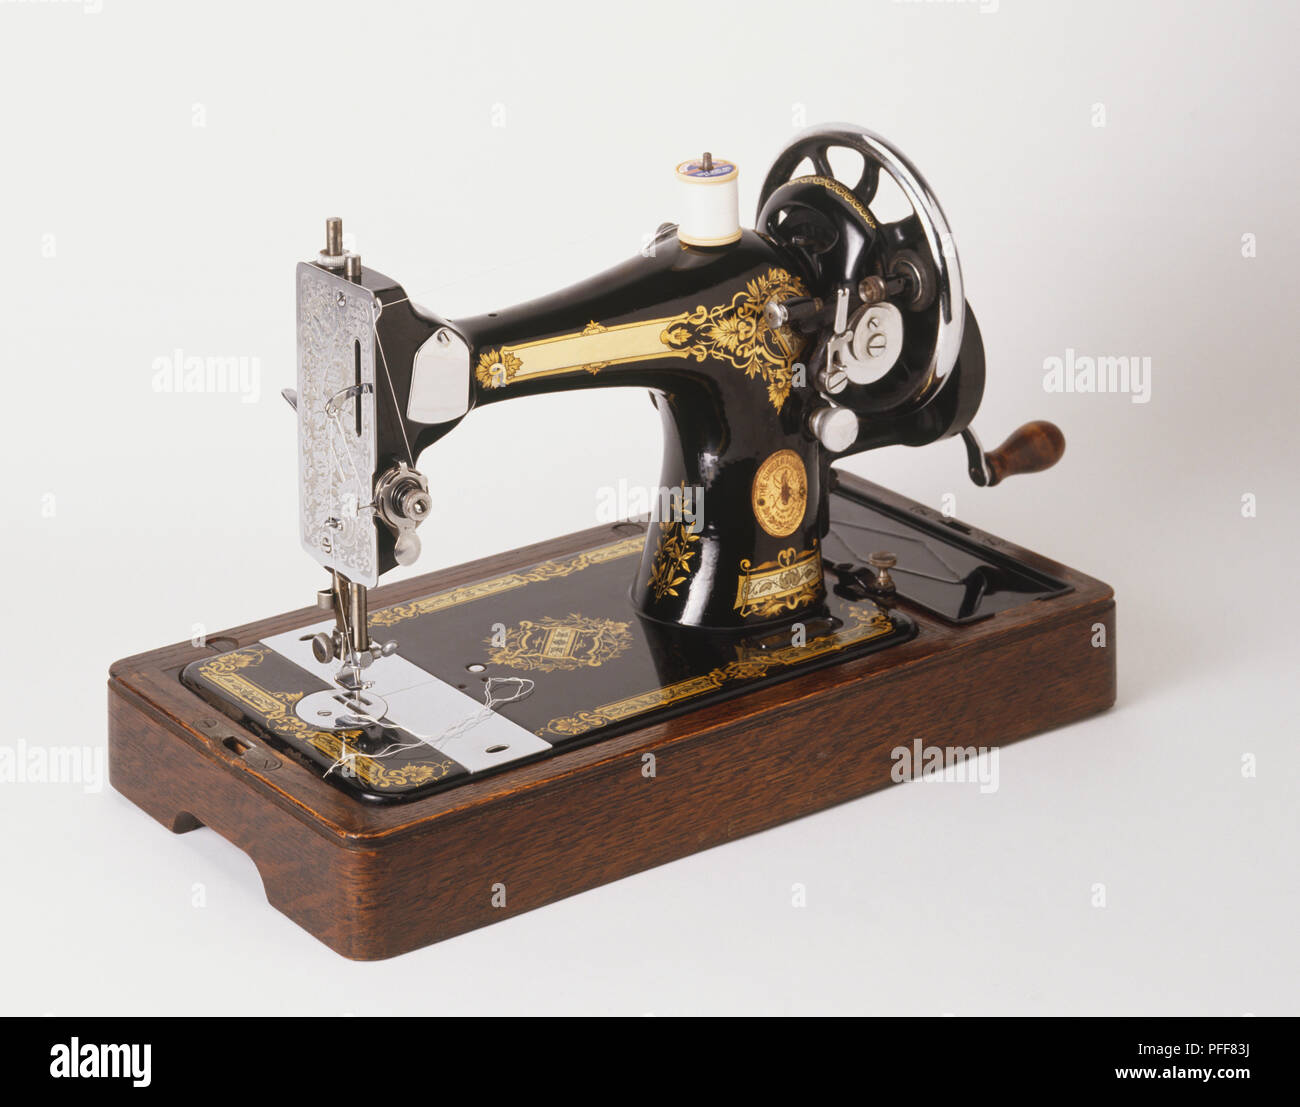 Old-fashioned sewing machine. Stock Photo